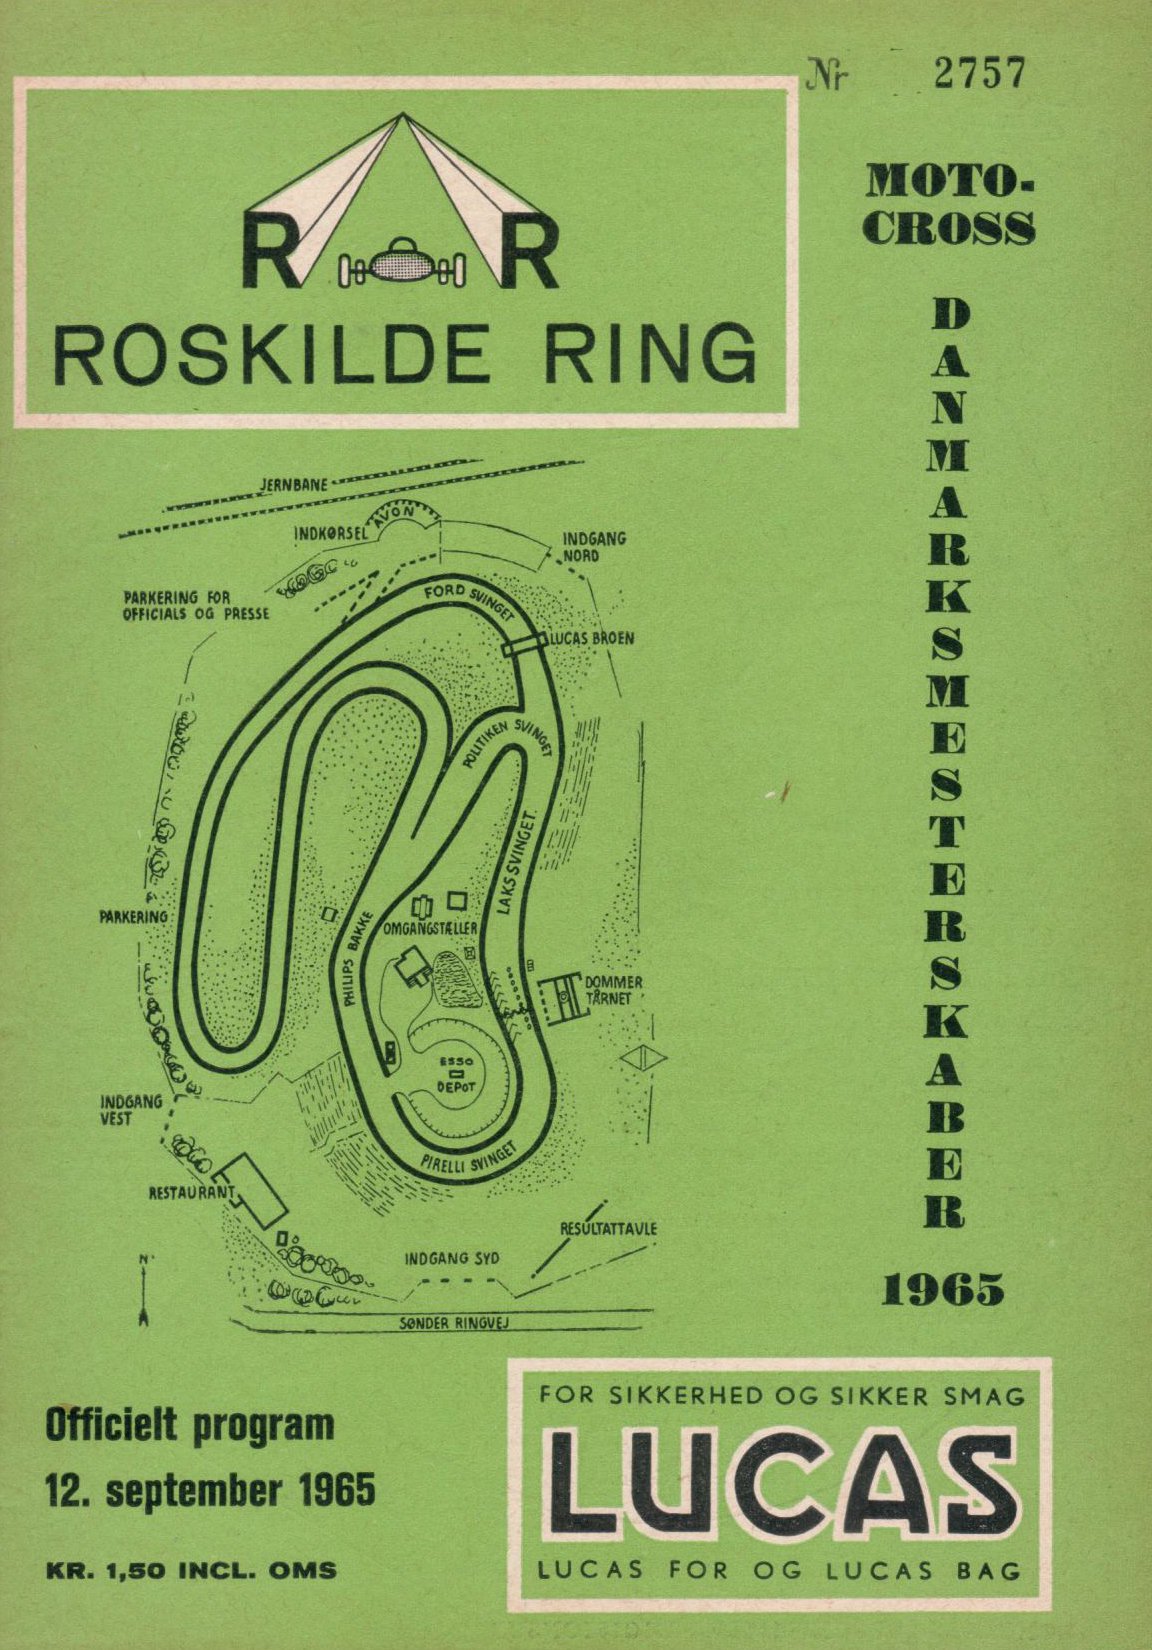 Motherland Slime Hammer Roskilde Ring | The Motor Racing Programme Covers Project